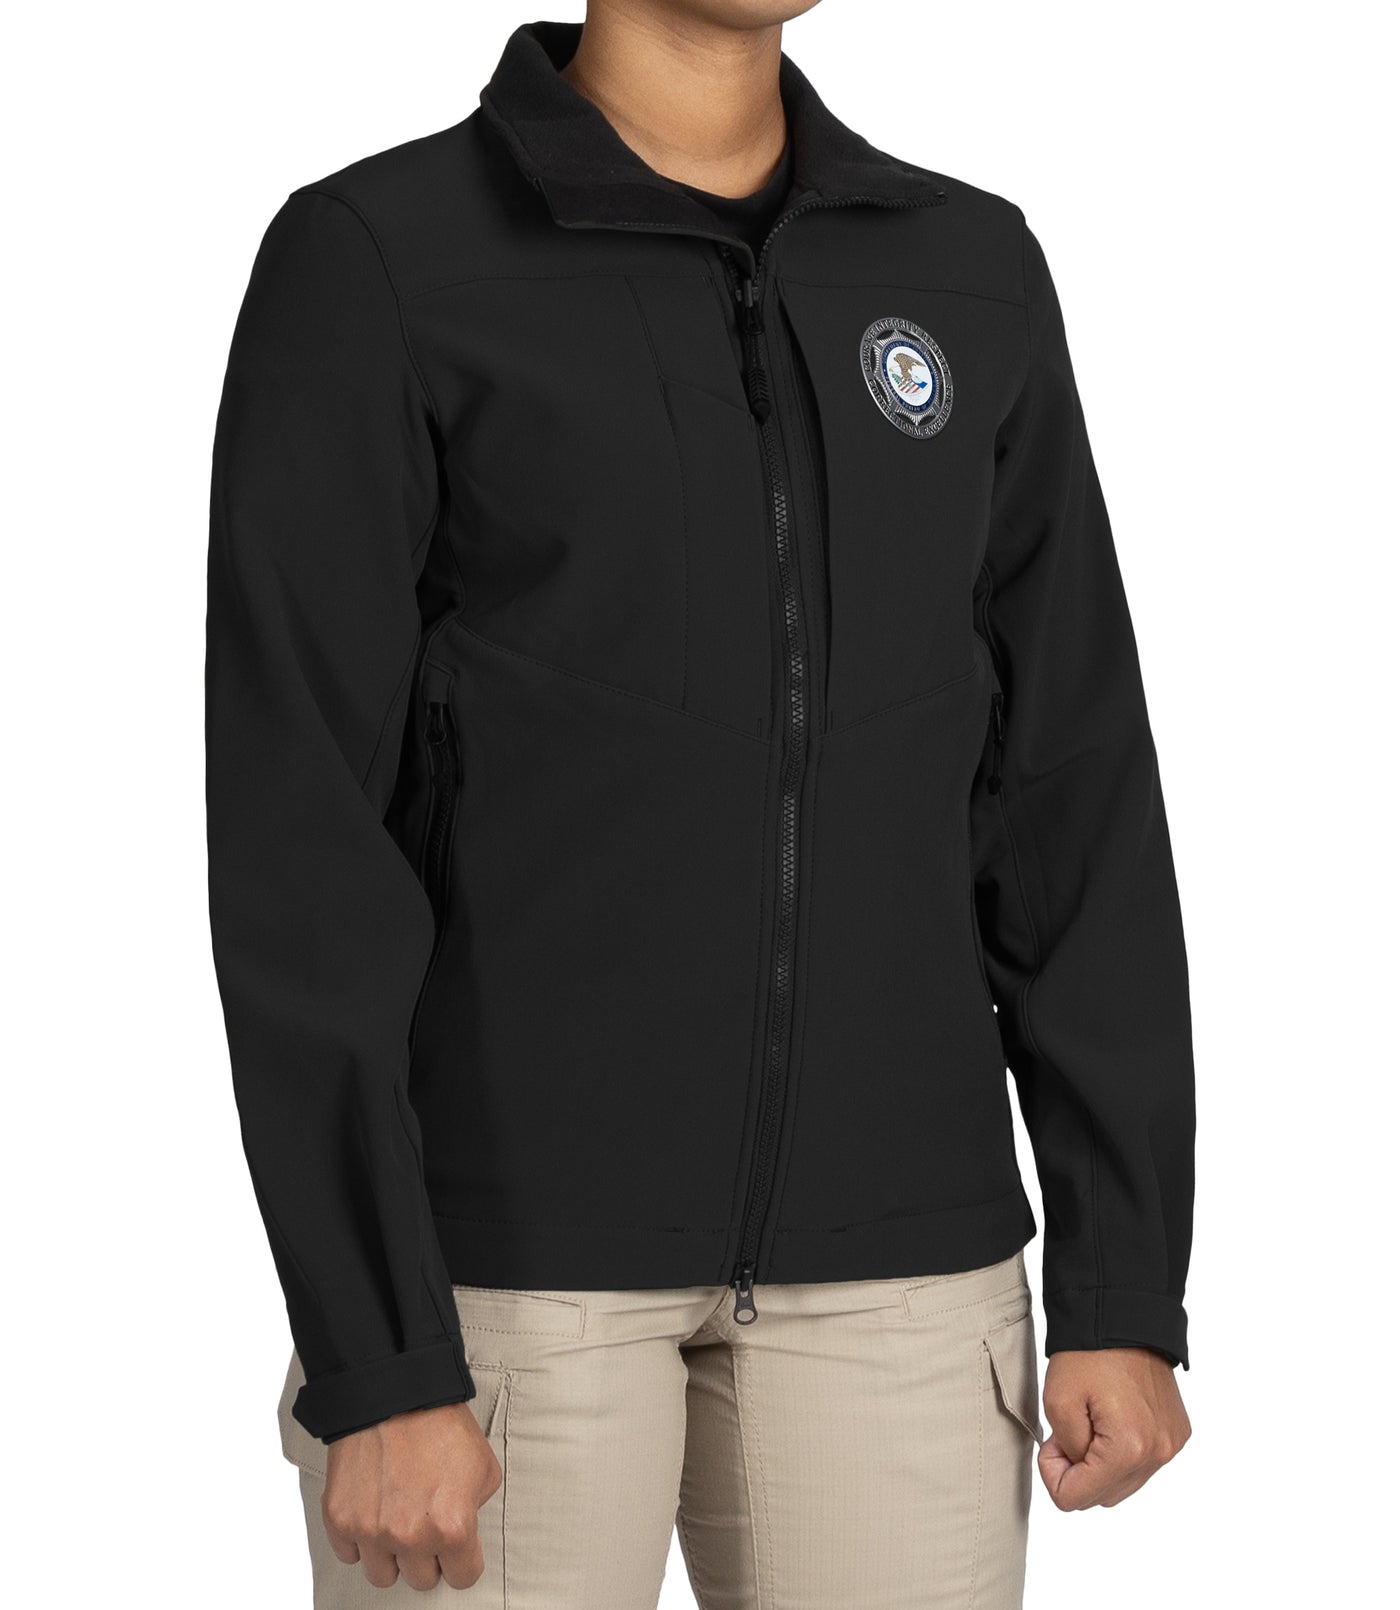 Women’s Tactix Softshell Parka (CPR Instructor)